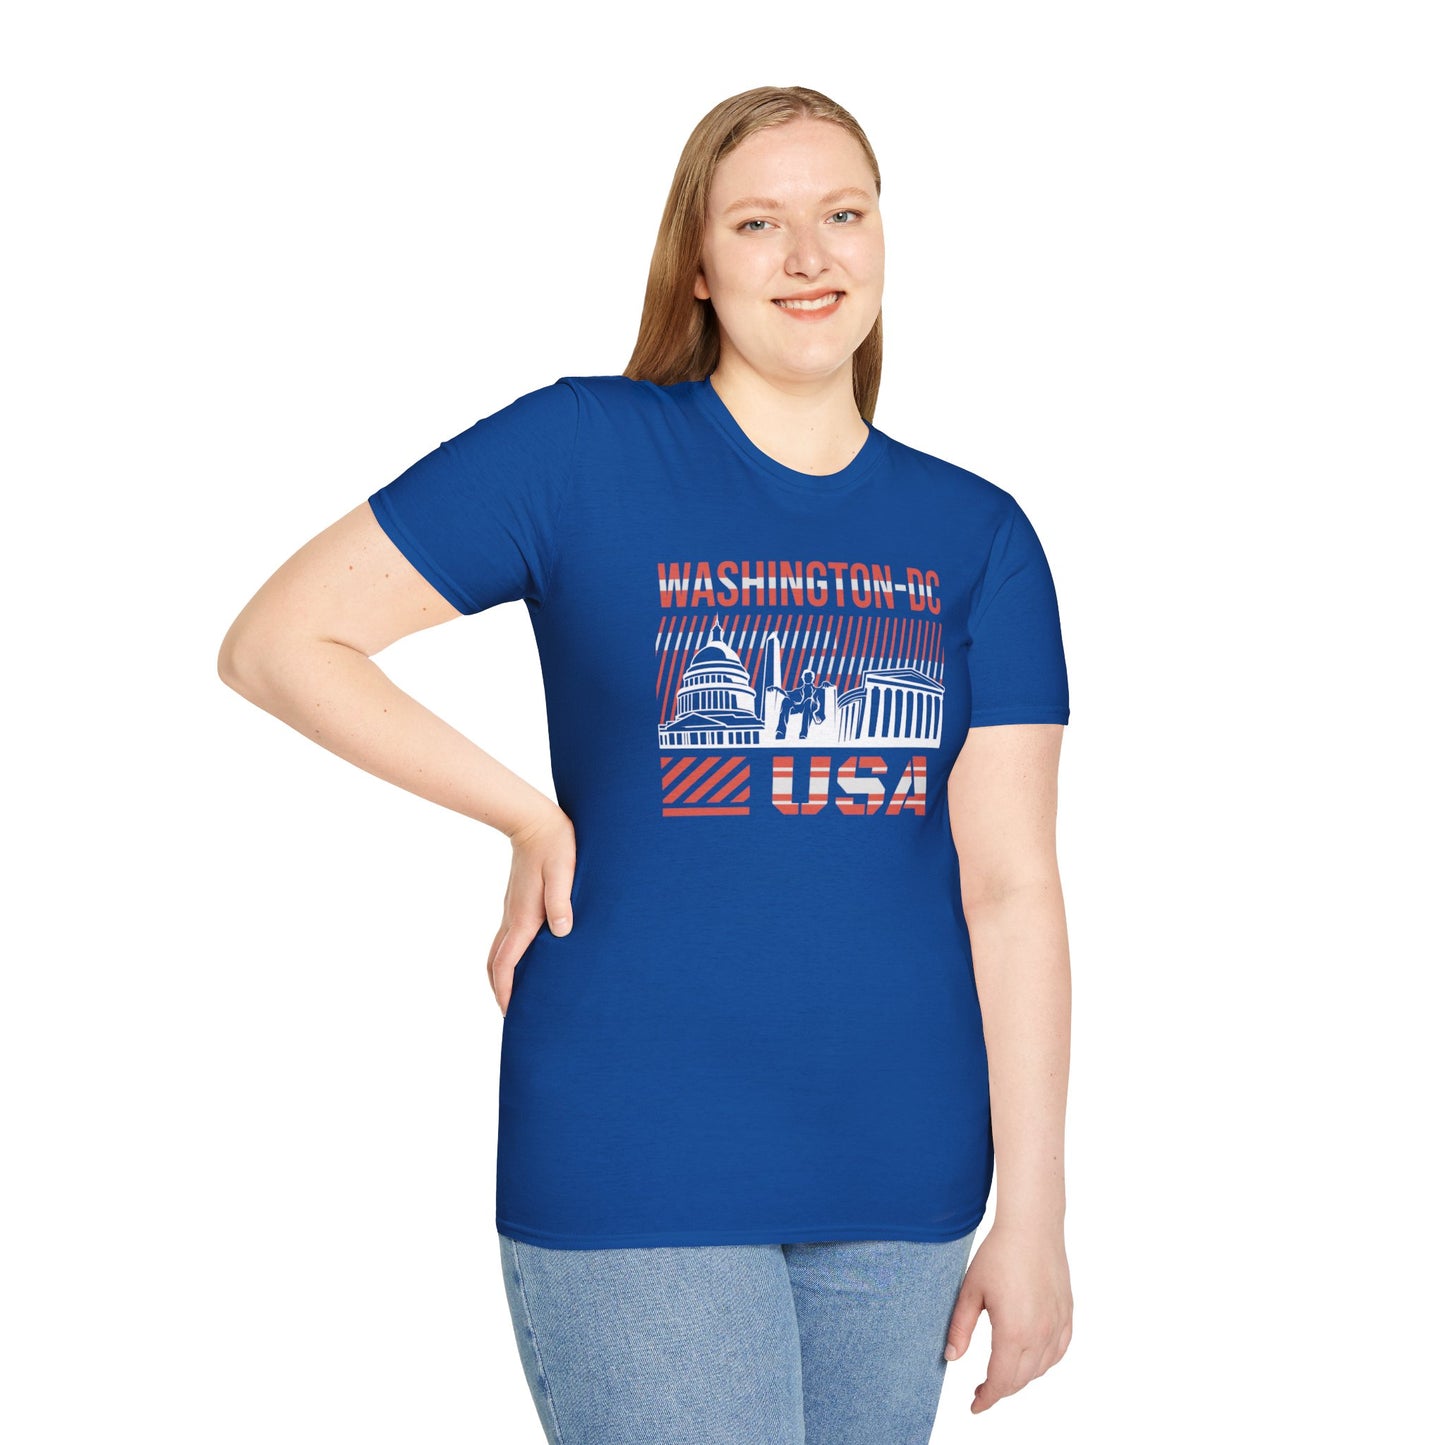 Discover Your Style with the Trendy 'Washington-DC' T-Shirt